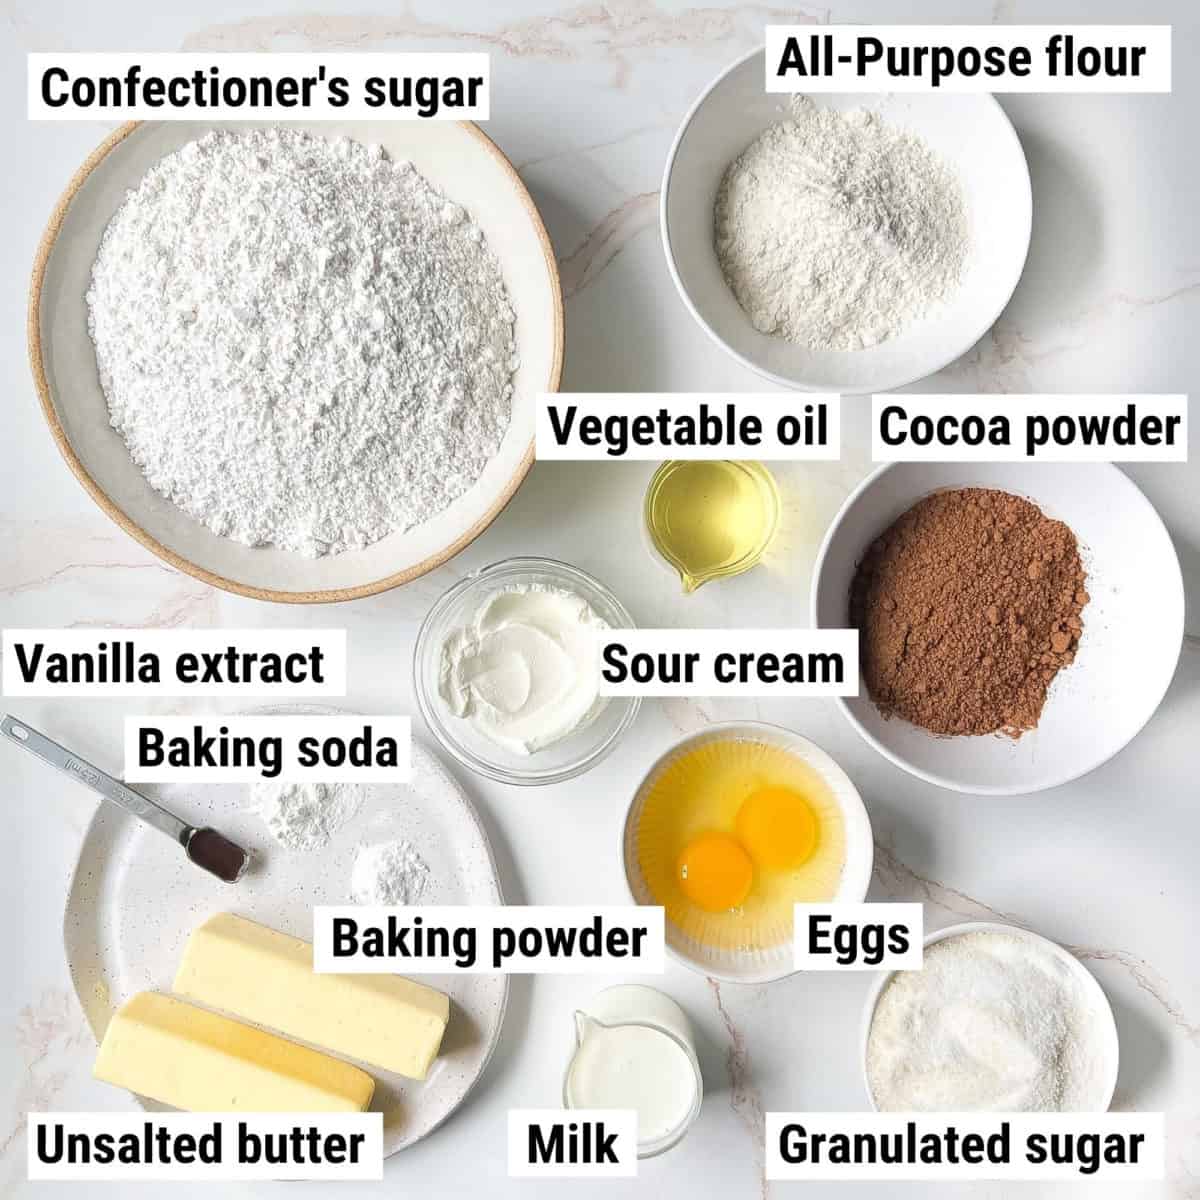 The ingredients used to make mini cupcakes spread out on a table.